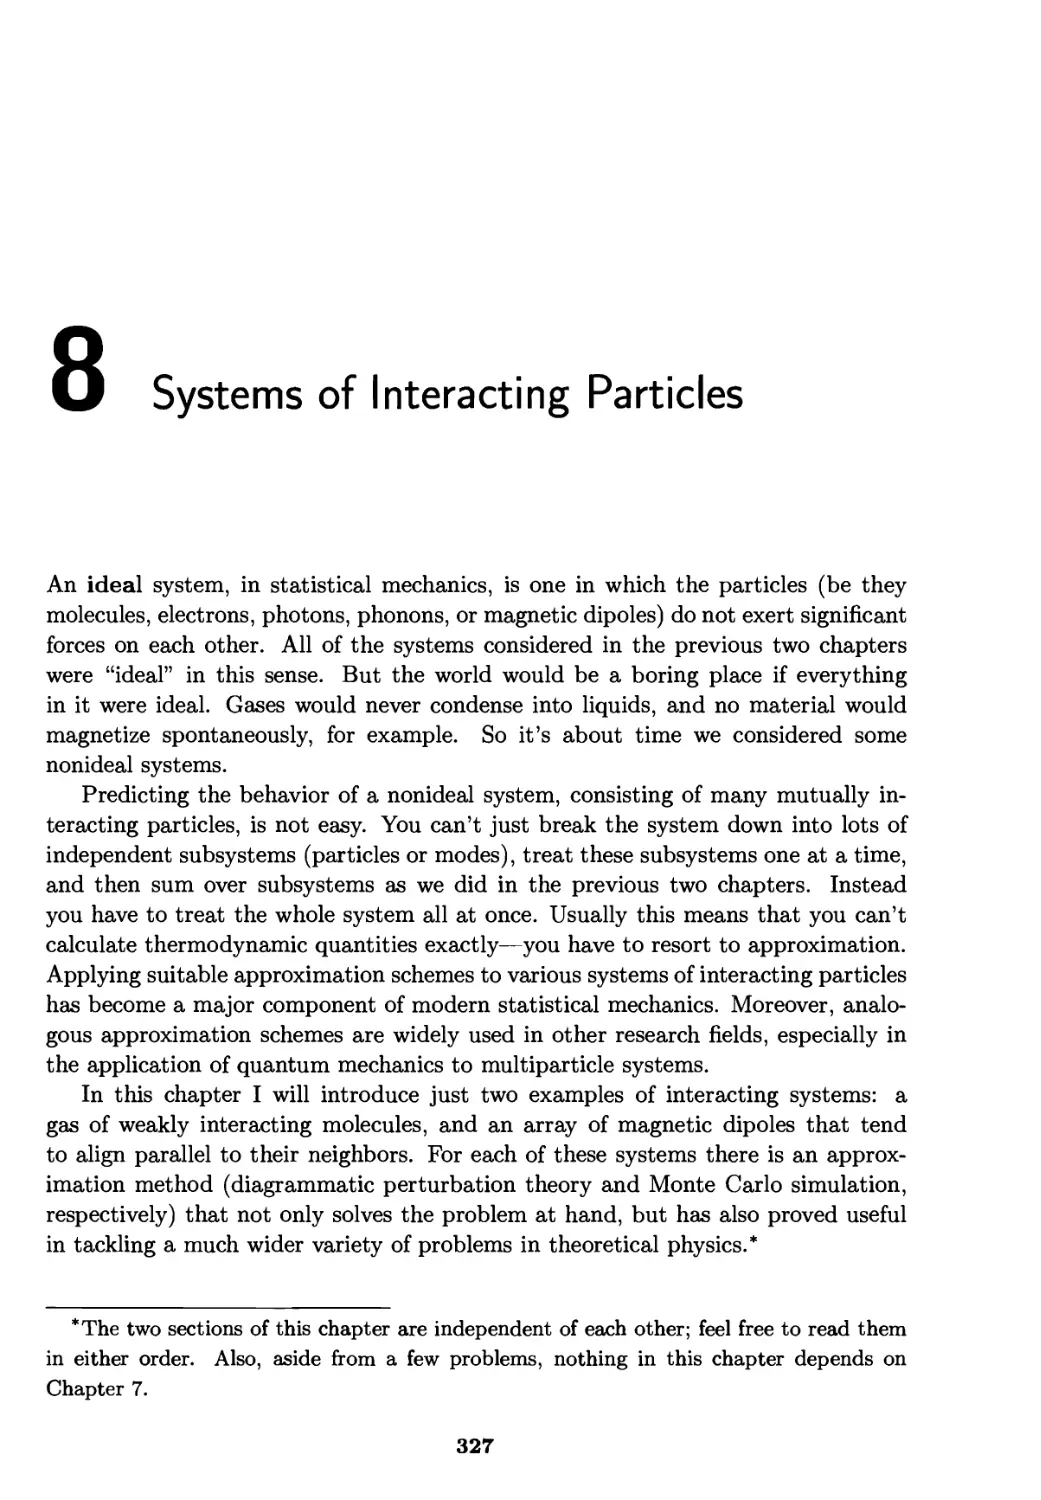 Chapter 8. Systems of Interacting Particles